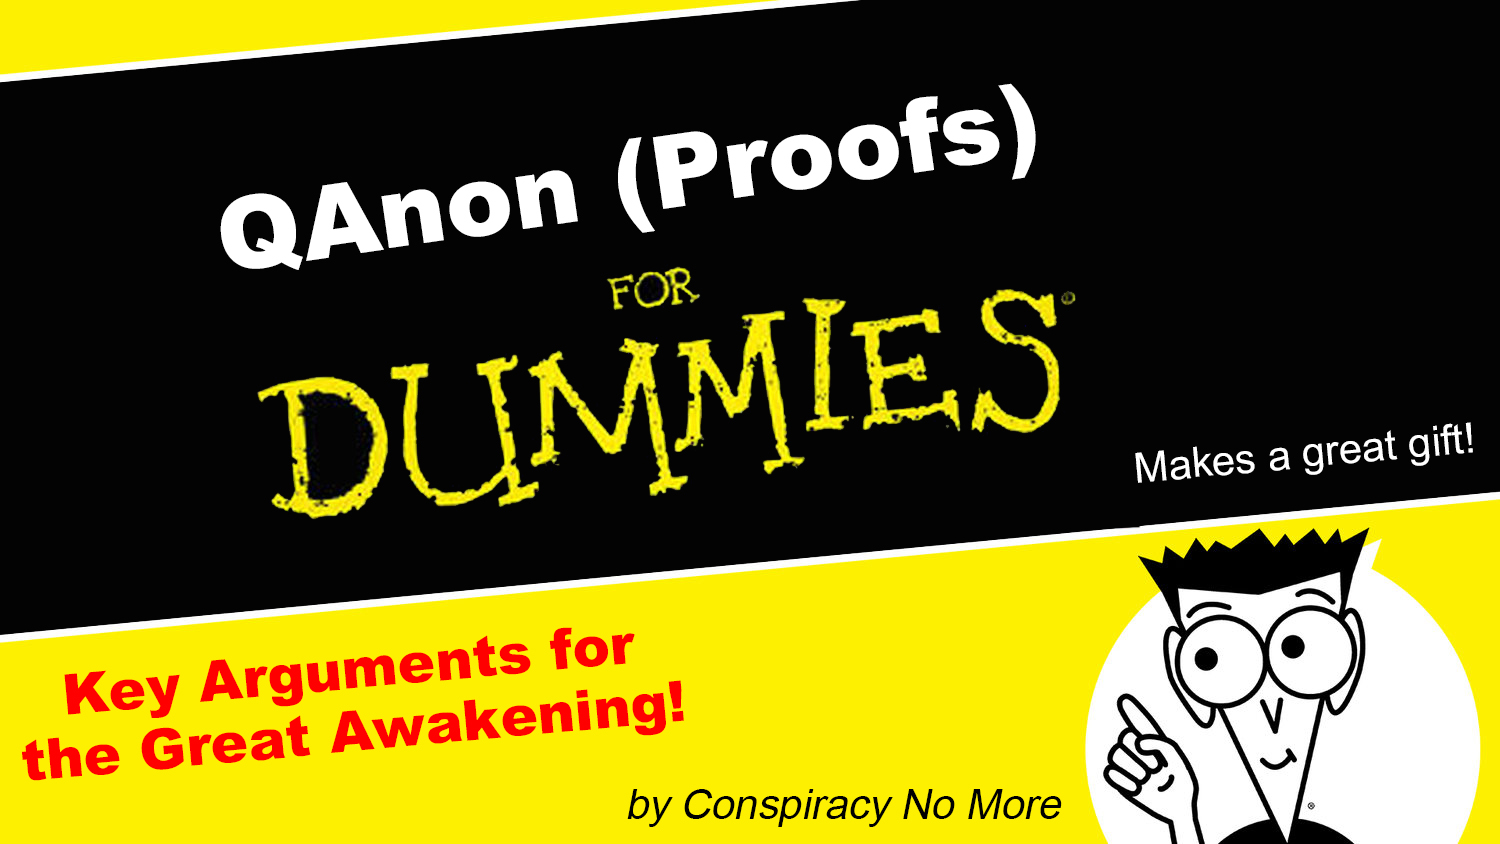 ultimate-qanon-proofs-for-dummies-help-wake-up-your-friends-with-this-clear-and-concise-expose_-of-q-_-volume-1-video-1.jpg